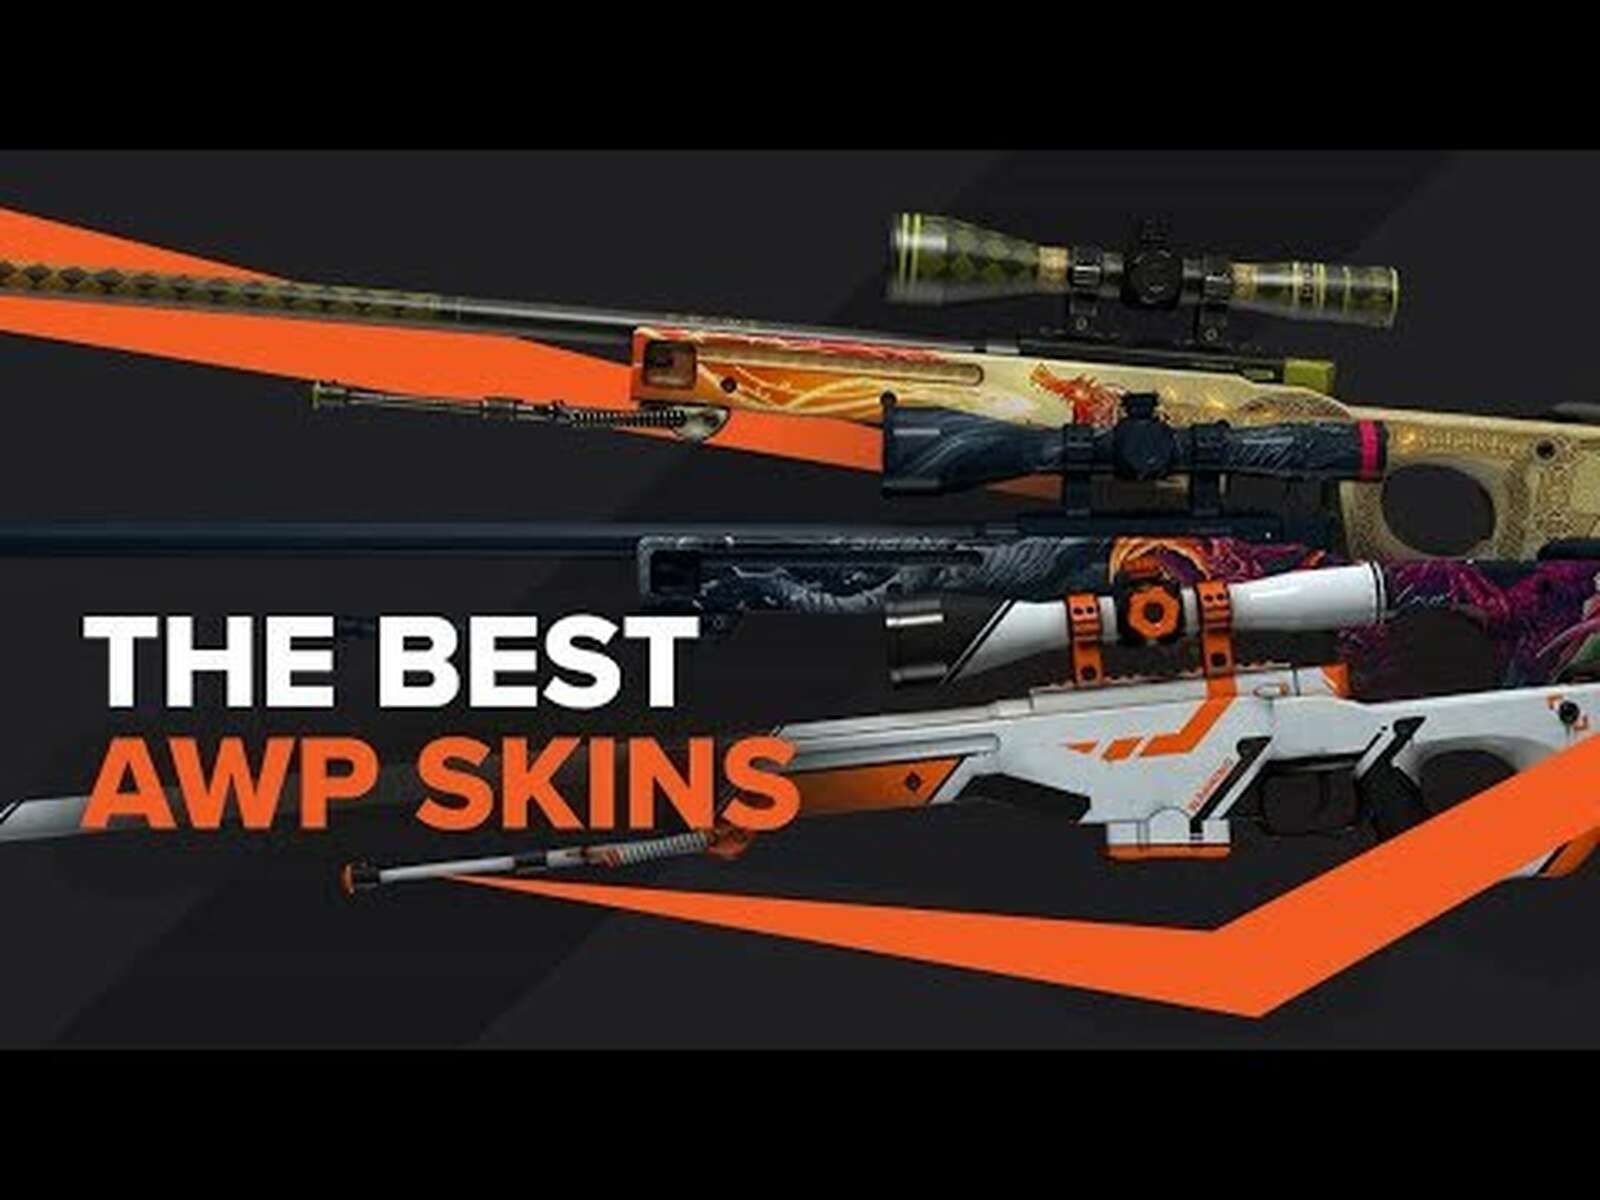 The Best AWP Skins in CSGO